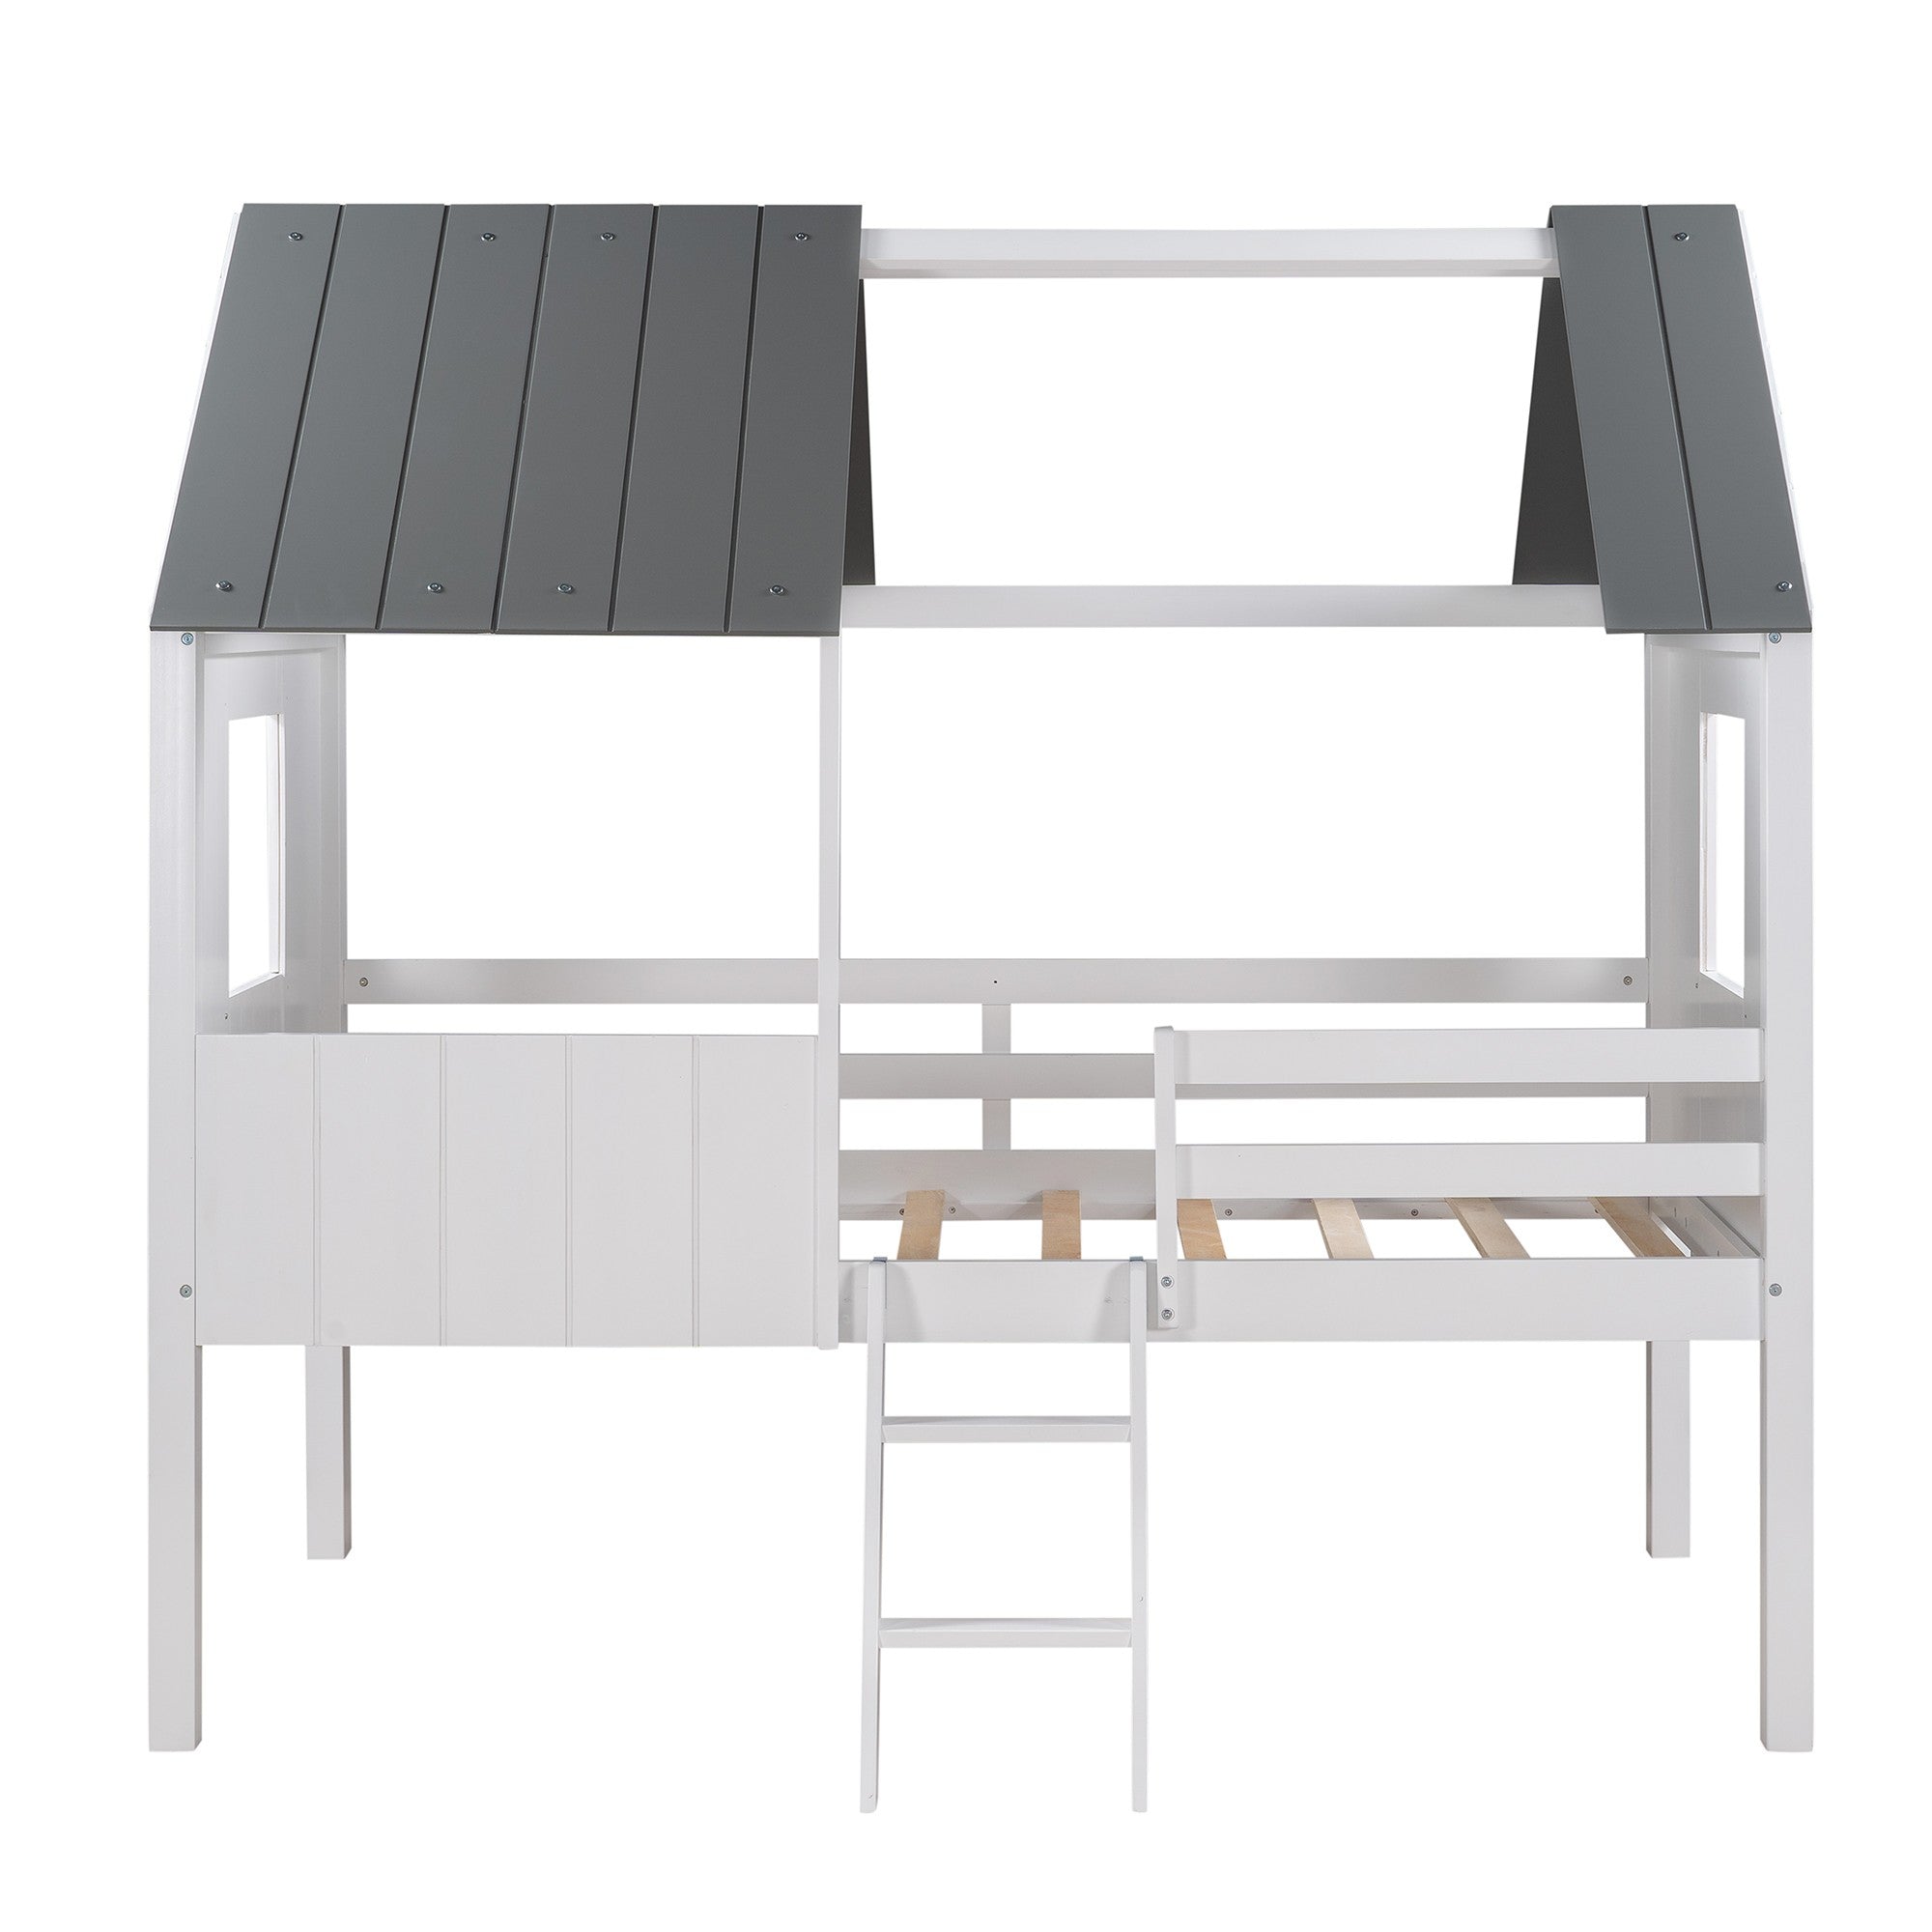 Gray and White Twin Size Loft House Bed with Side Windows